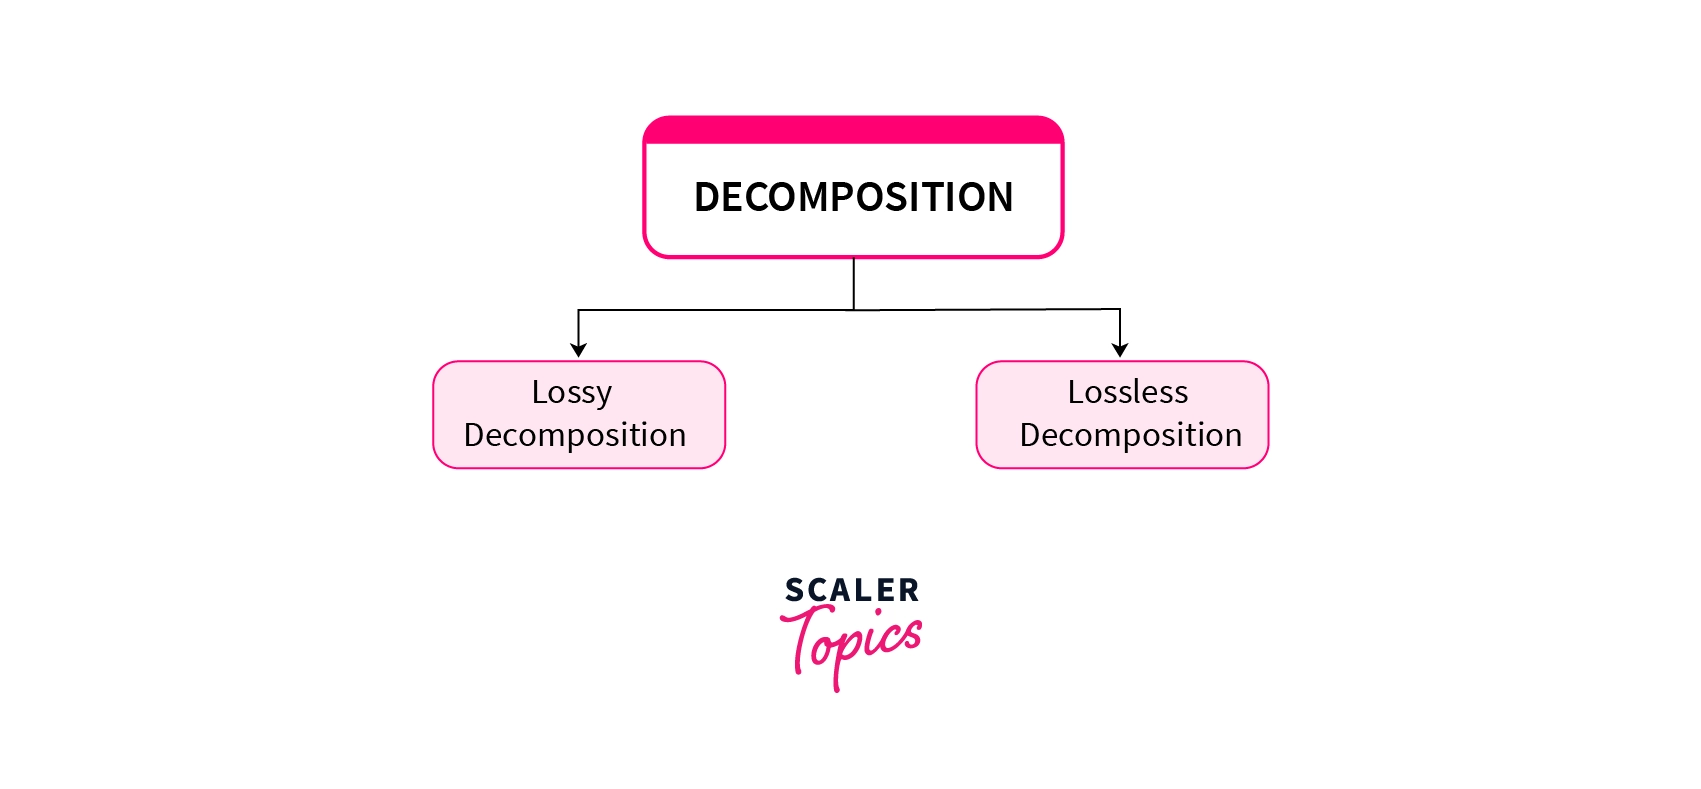 Type of Decomposition